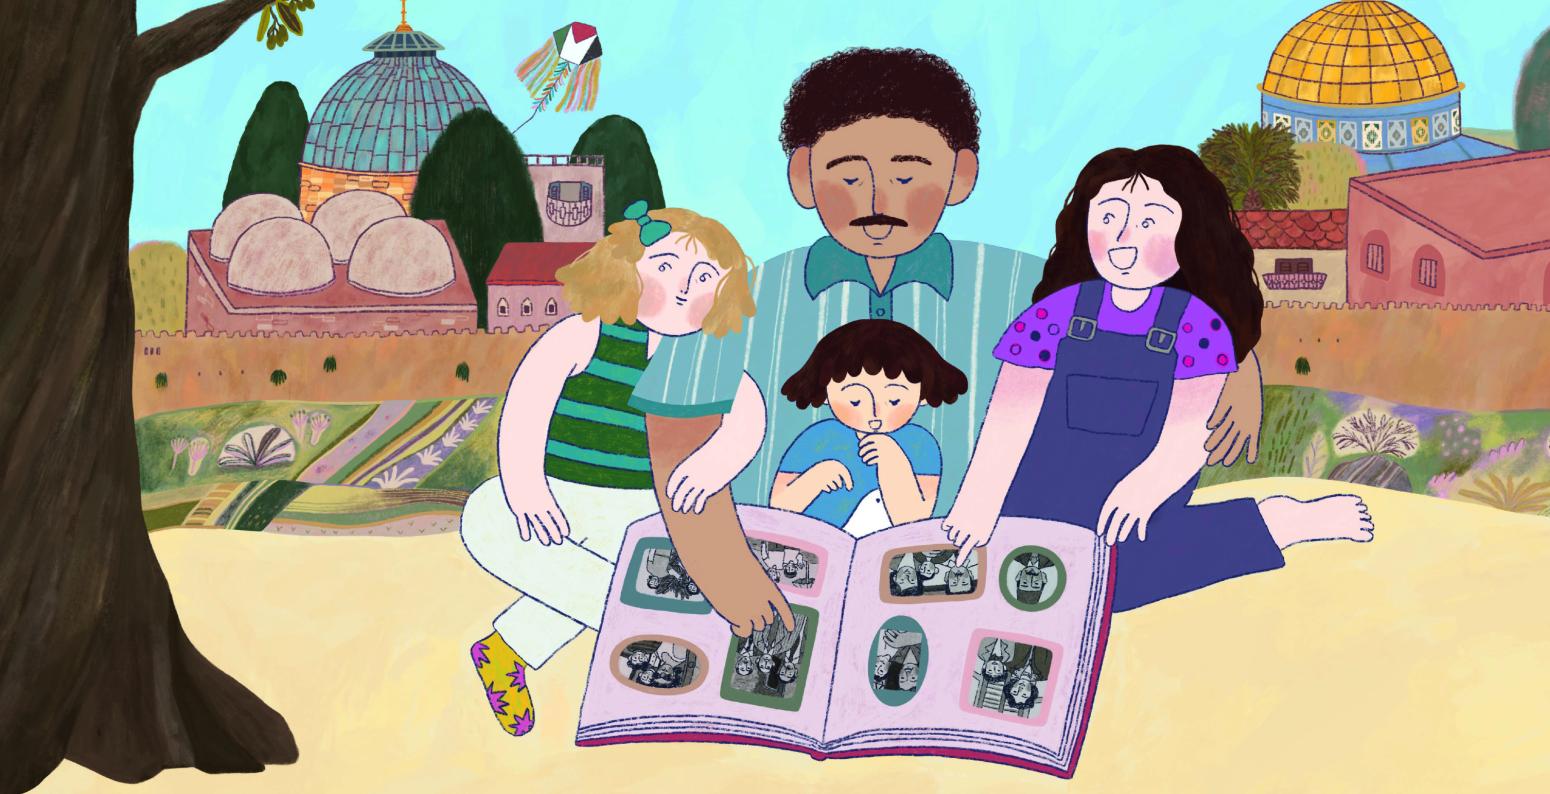 Book cover of Homeland: My Father Dreams of Palestine, showing a family looking at a photo album.